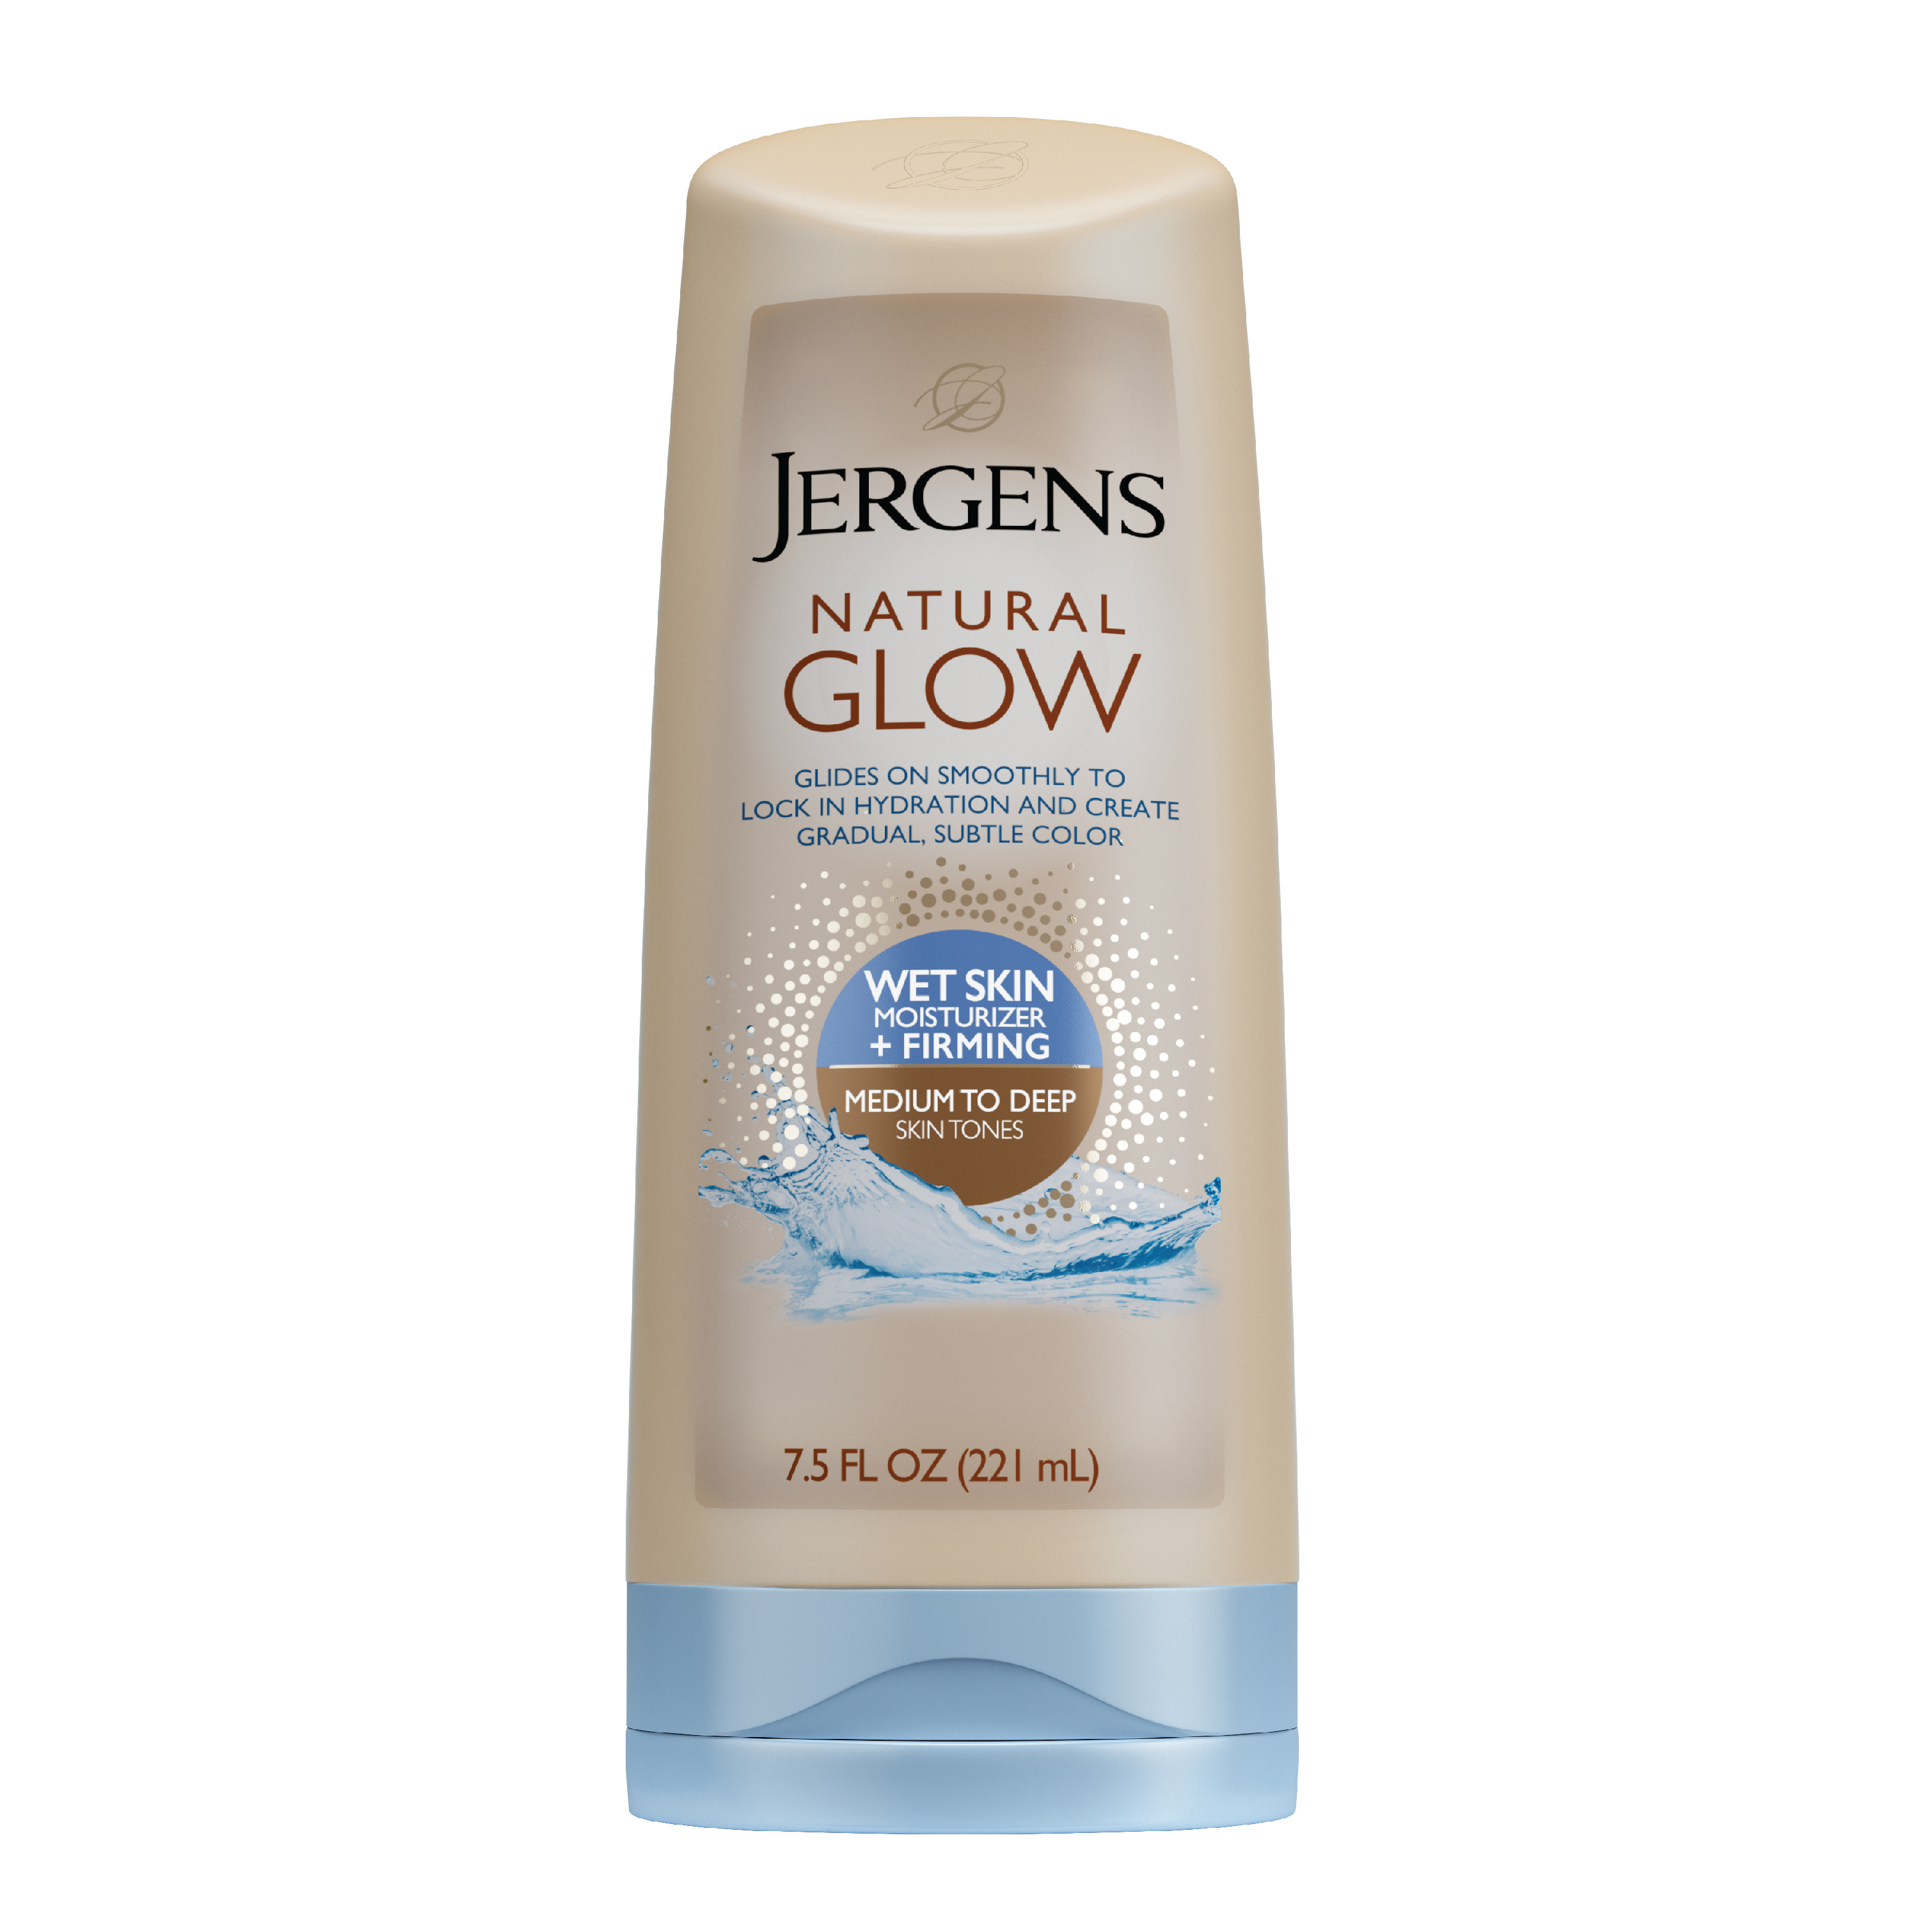 slide 1 of 9, Jergens Natural Glow +FIRMING In-shower Sunless Tanning Lotion, Self Tanner for Medium to Deep Skin Tone, Anti Cellulite Firming Body Lotion, for Gradual and Natural-Looking Fake Tan, 7.5 Ounce, 7.50 fl oz